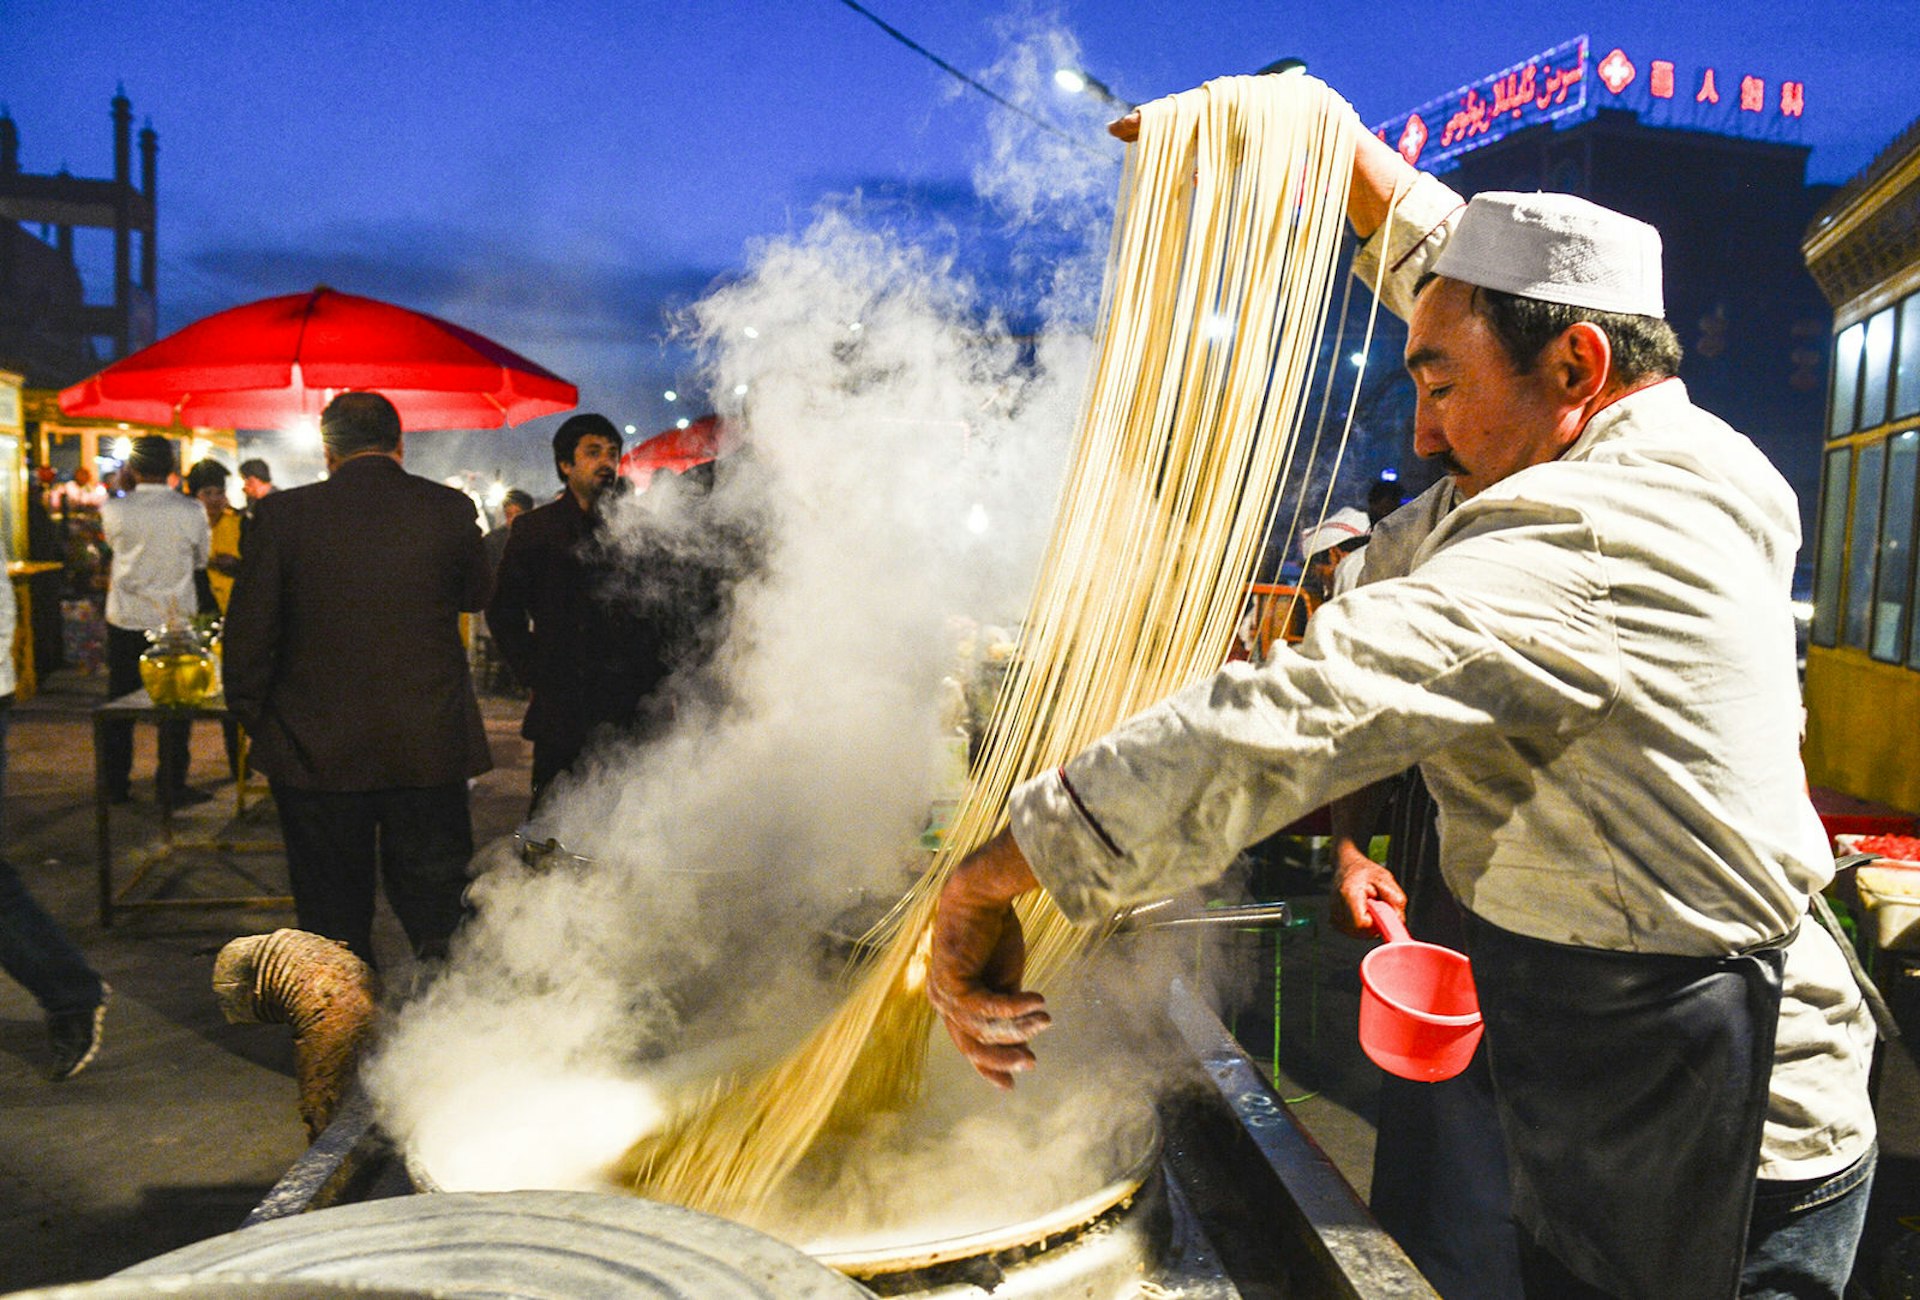 Forget 'how long's a piece of string?' – how long are these noodles!? © Xinhua News Agency / Getty Images